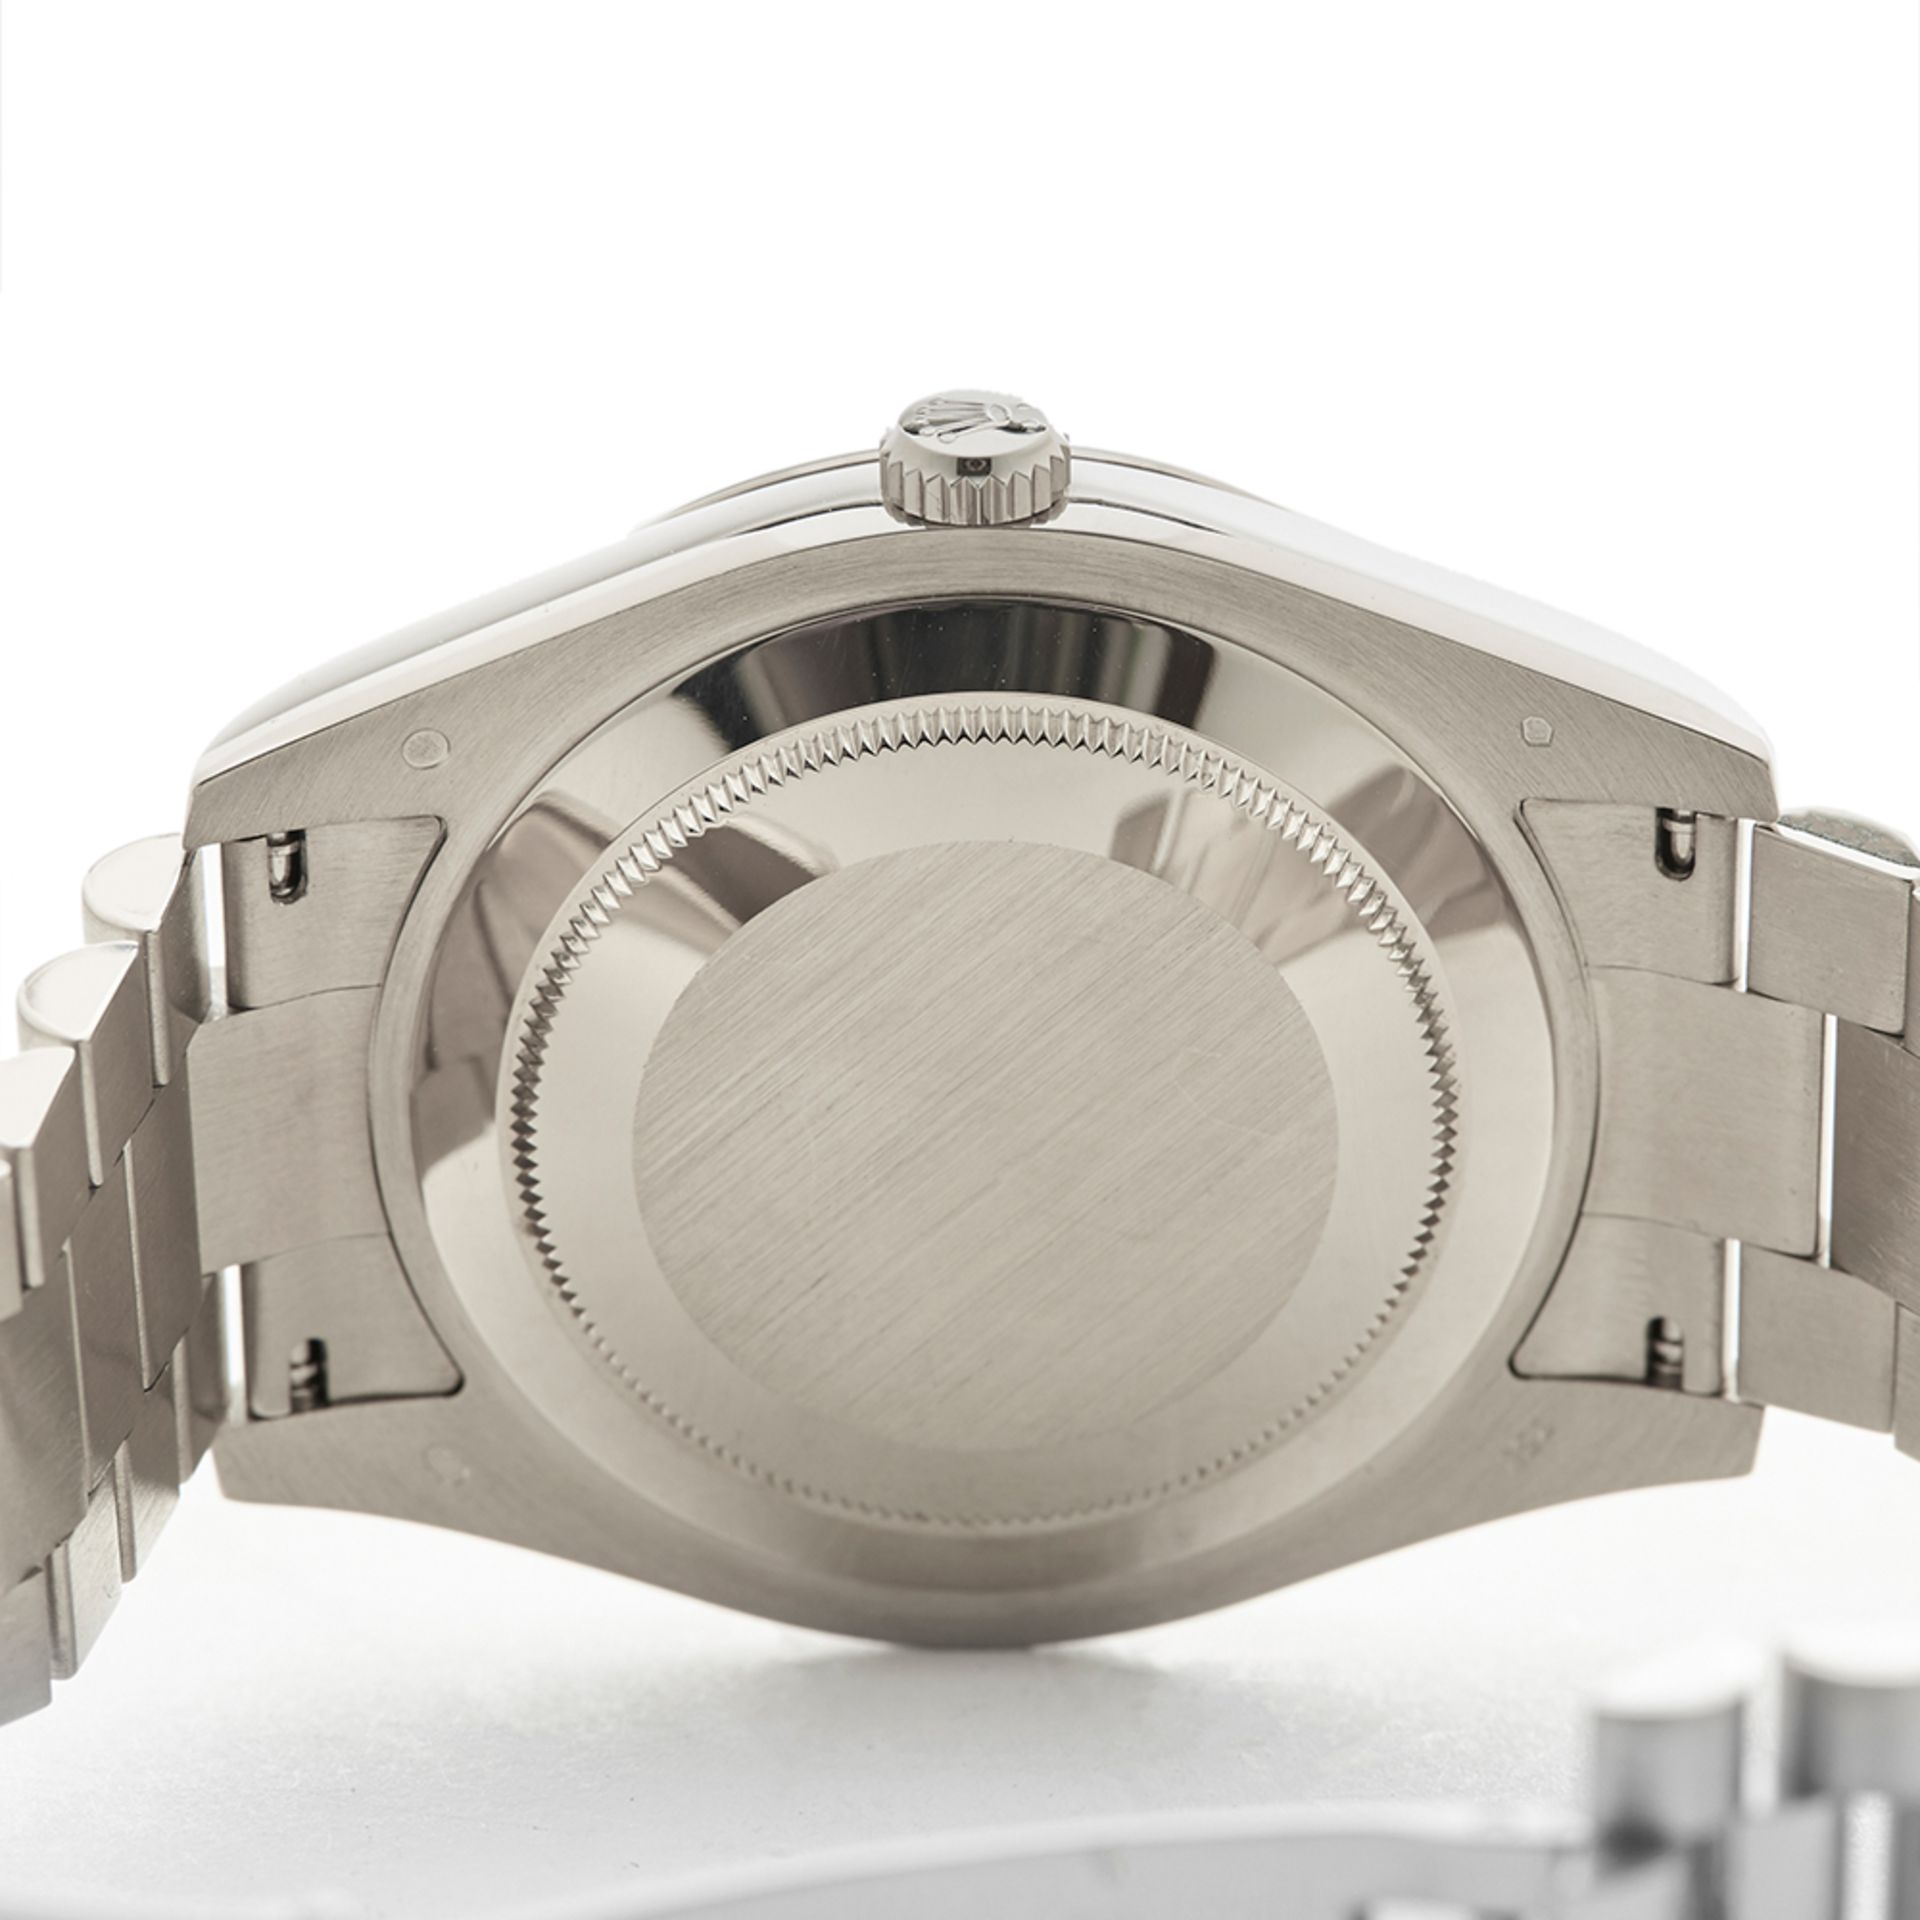 Rolex Day-Date II 41mm 18k White Gold - 218239 - Image 8 of 9